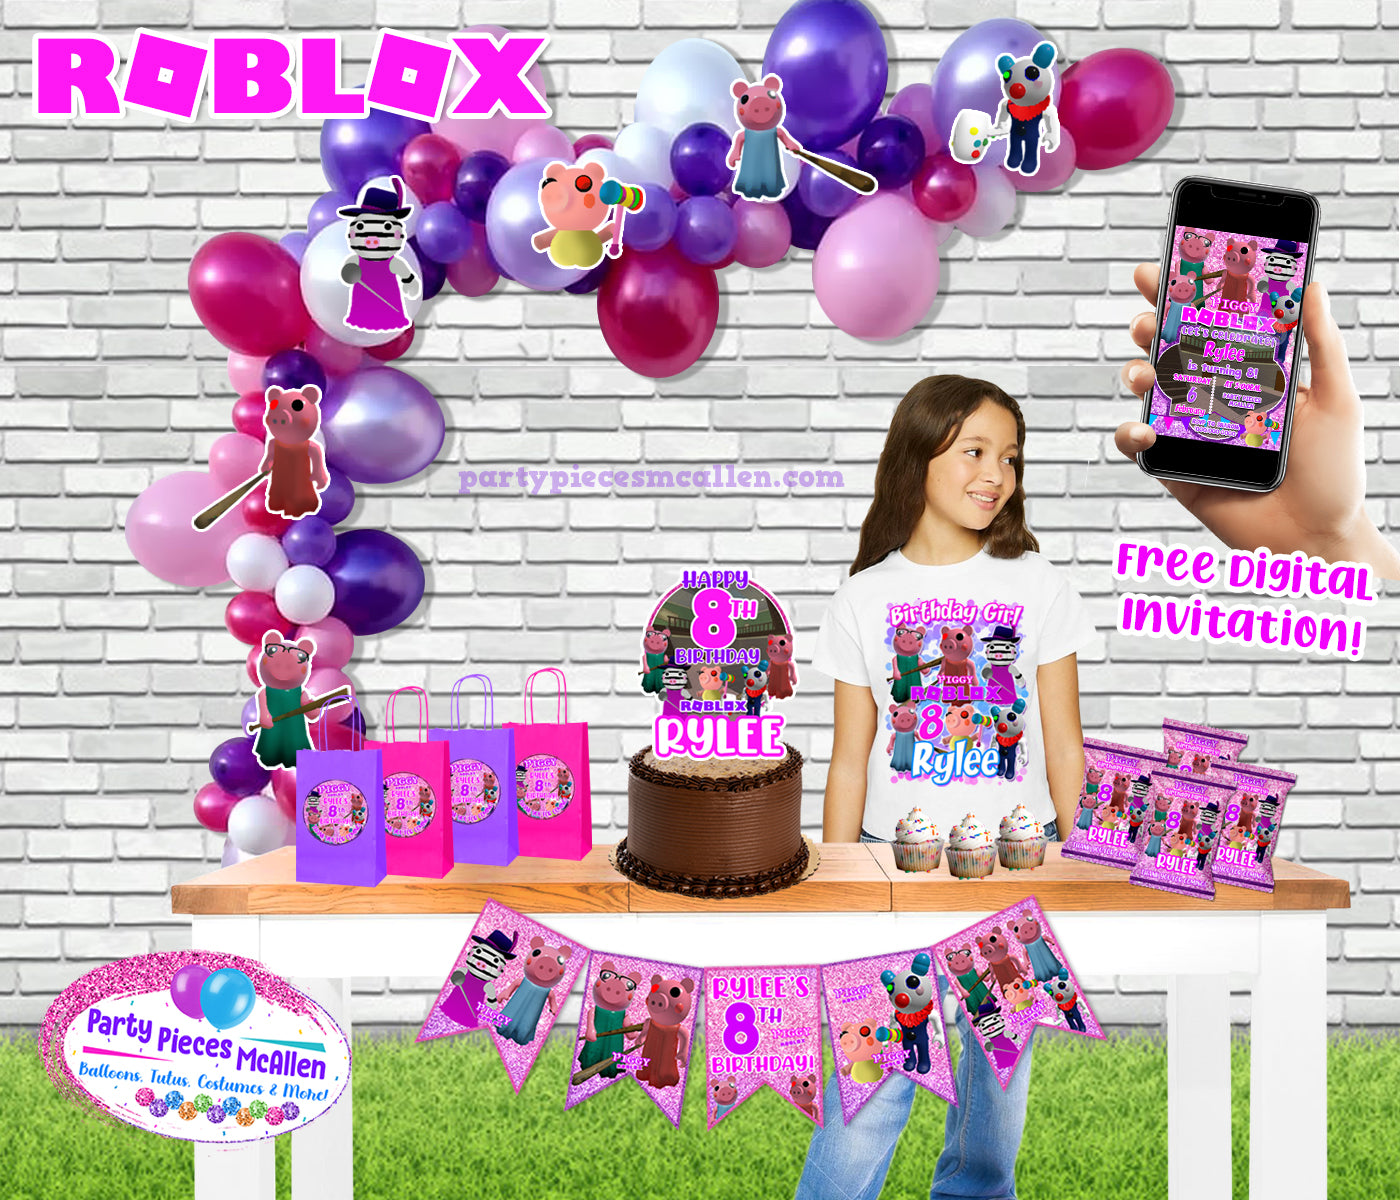 Roblox Girl Piggy Garland Deluxe Party Pack Party Pieces Mcallen - roblox girl birthday party